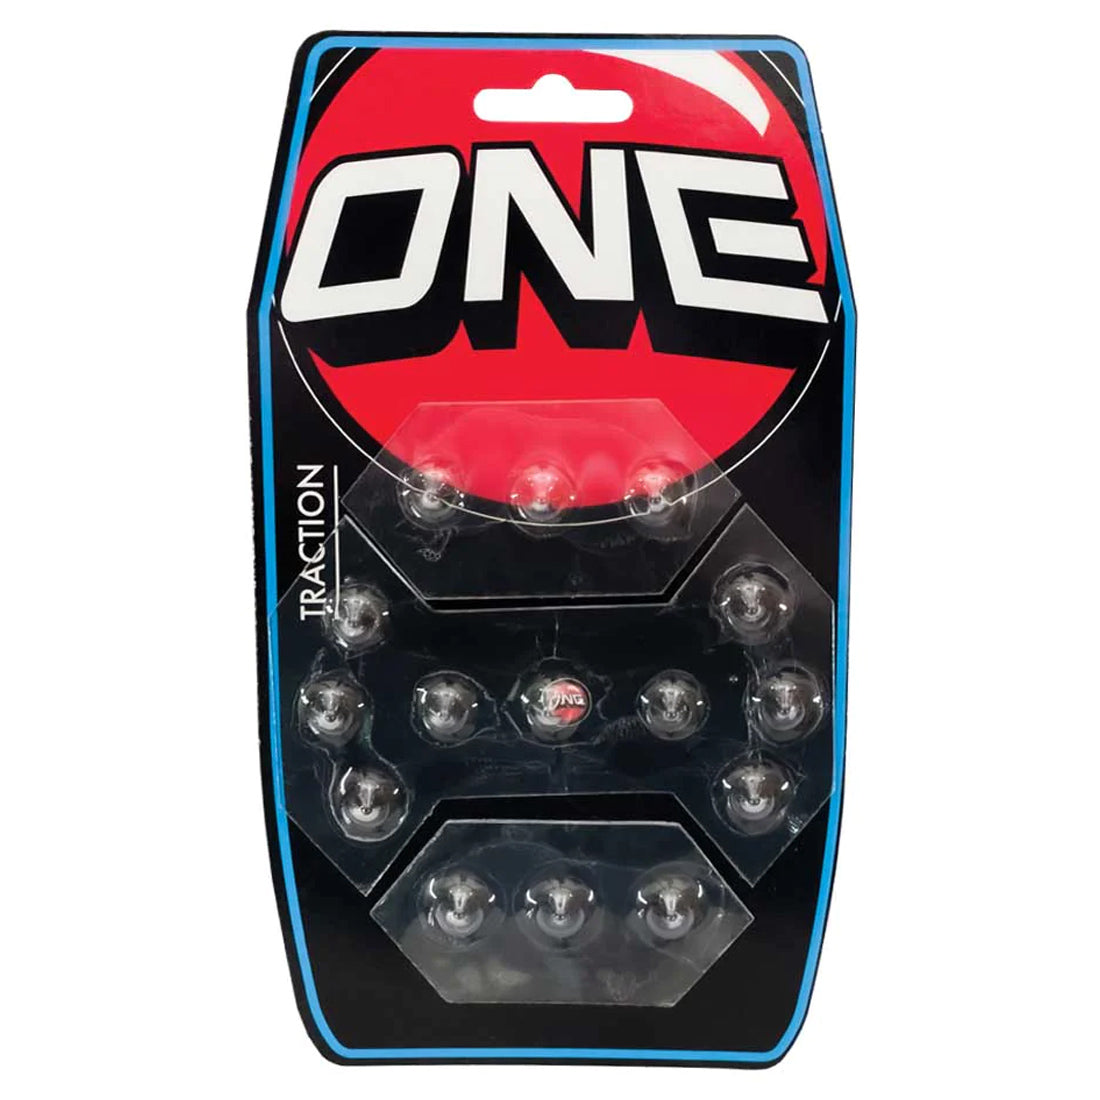 One Ball Jay Mod Pod 3 Piece Snowboard Stomp Pad - Clear/Clear image 1